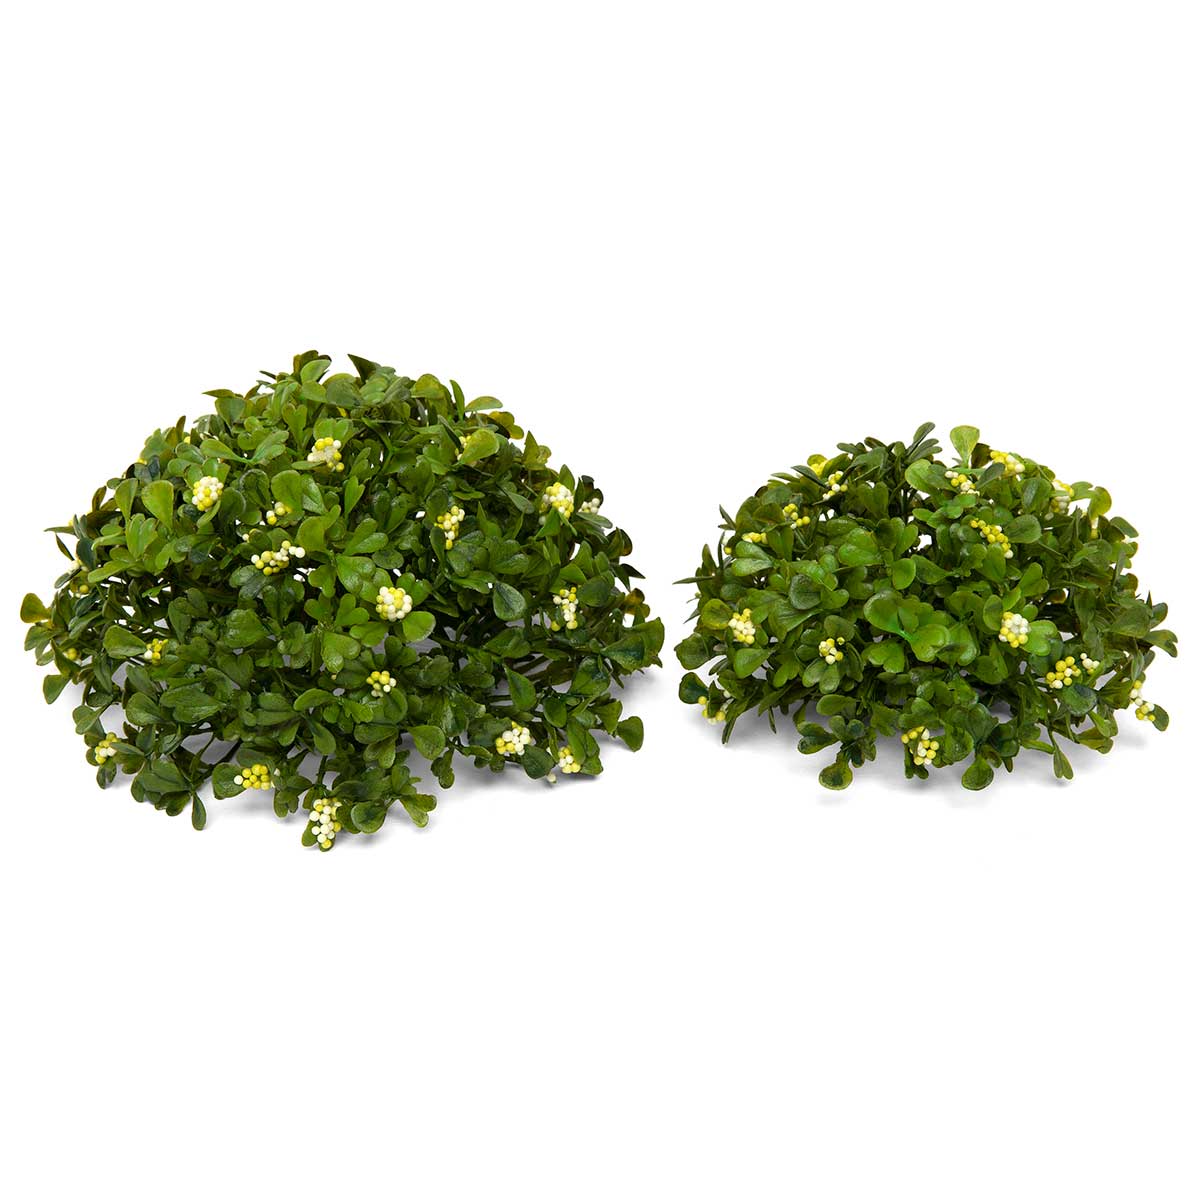 DOME BOXWOOD WITH BERRIES SMALL 5IN X 2.5IN GREEN/WHITE